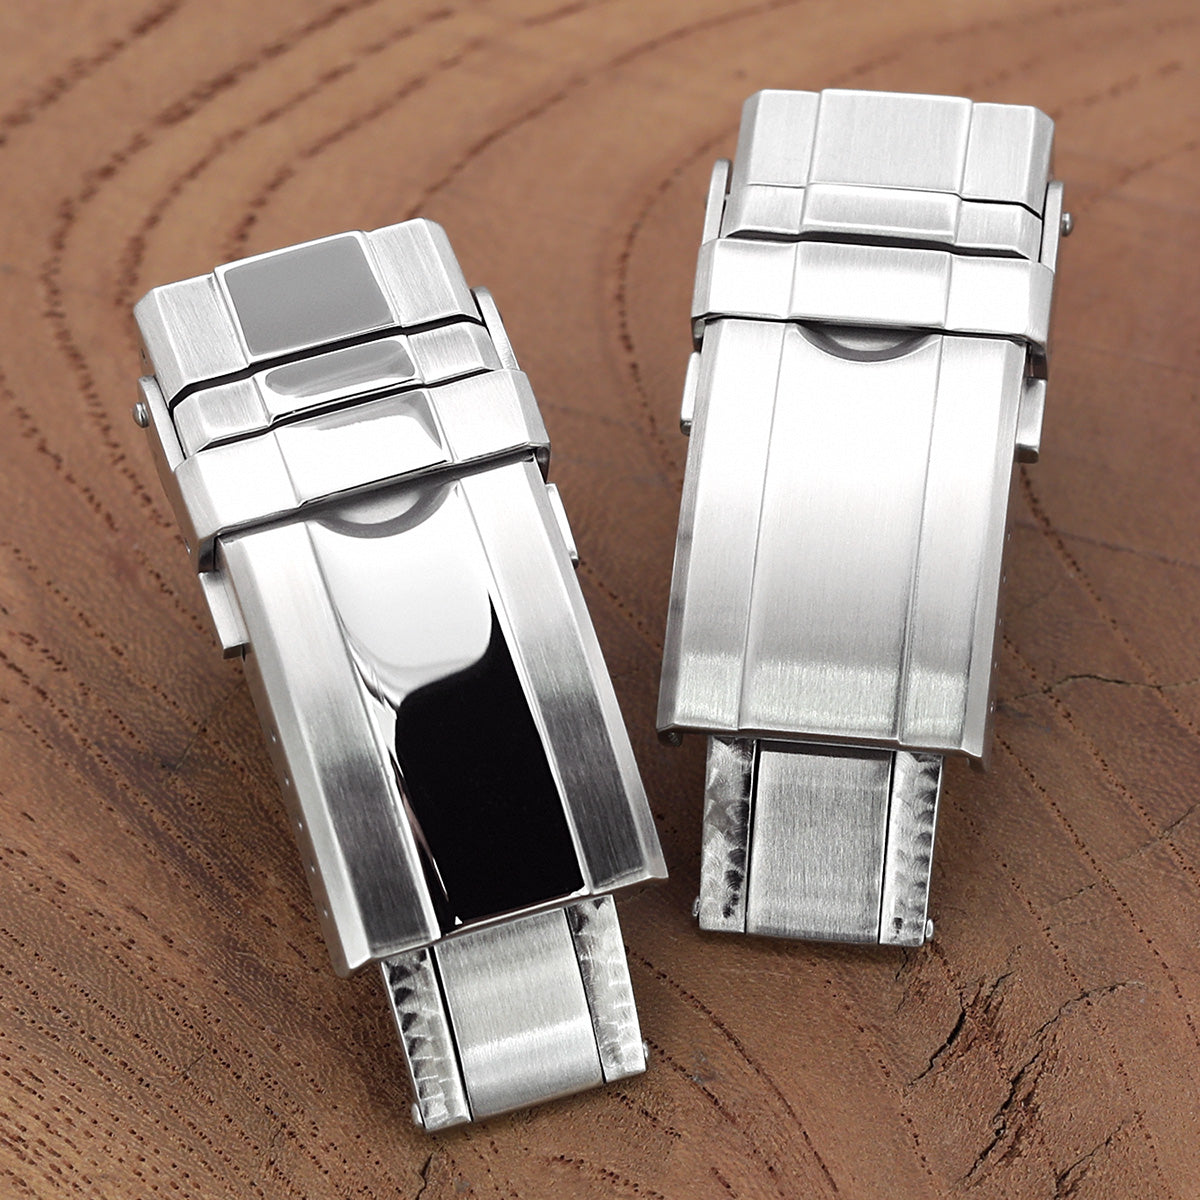 MiLTAT Turning Clasp stainless steel Diver watch clasp | Strapcode